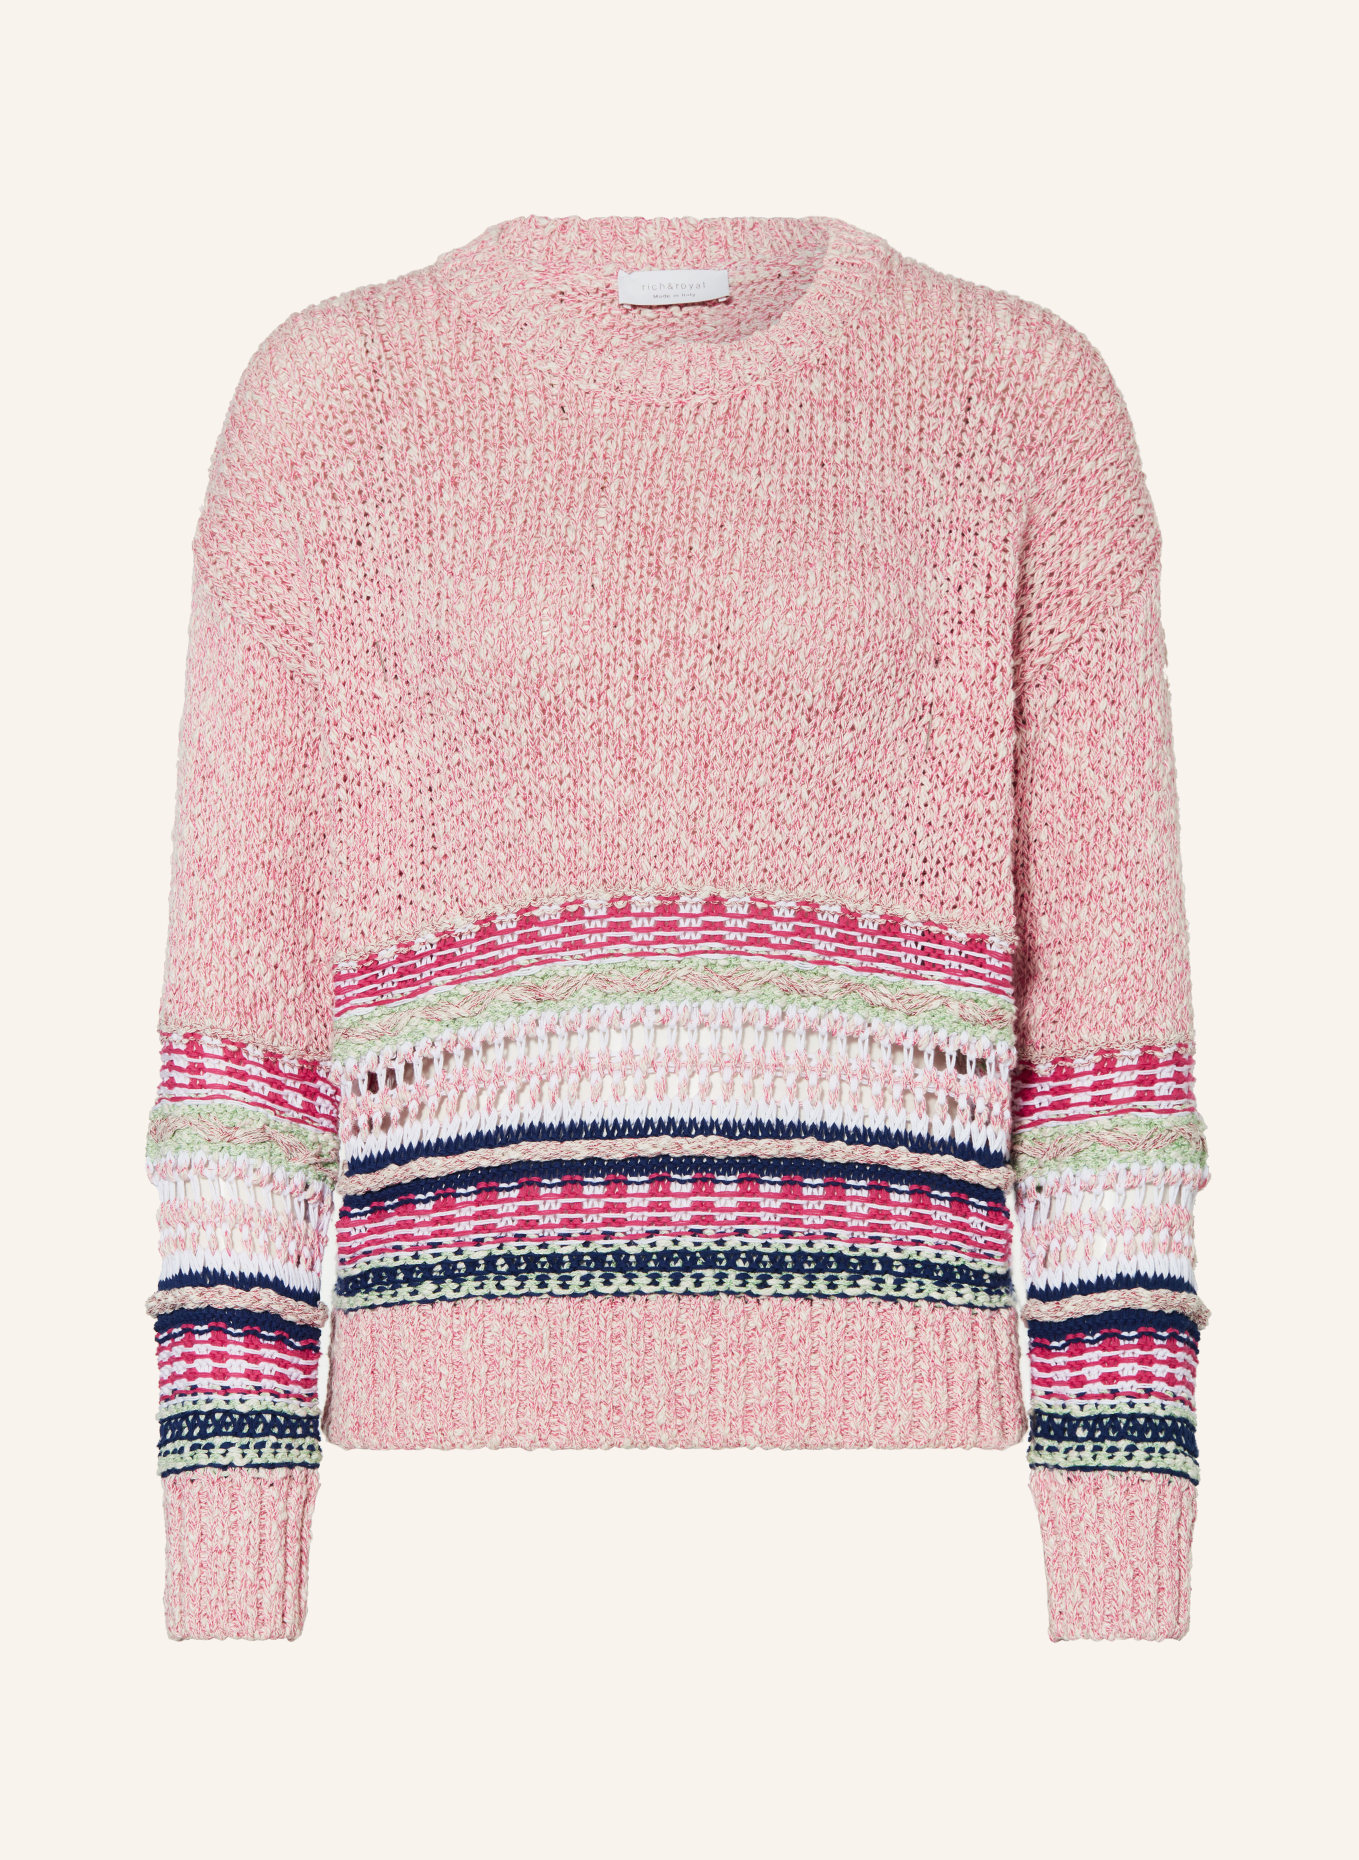 rich&royal Pullover, Farbe: CREME/ WEISS/ PINK (Bild 1)